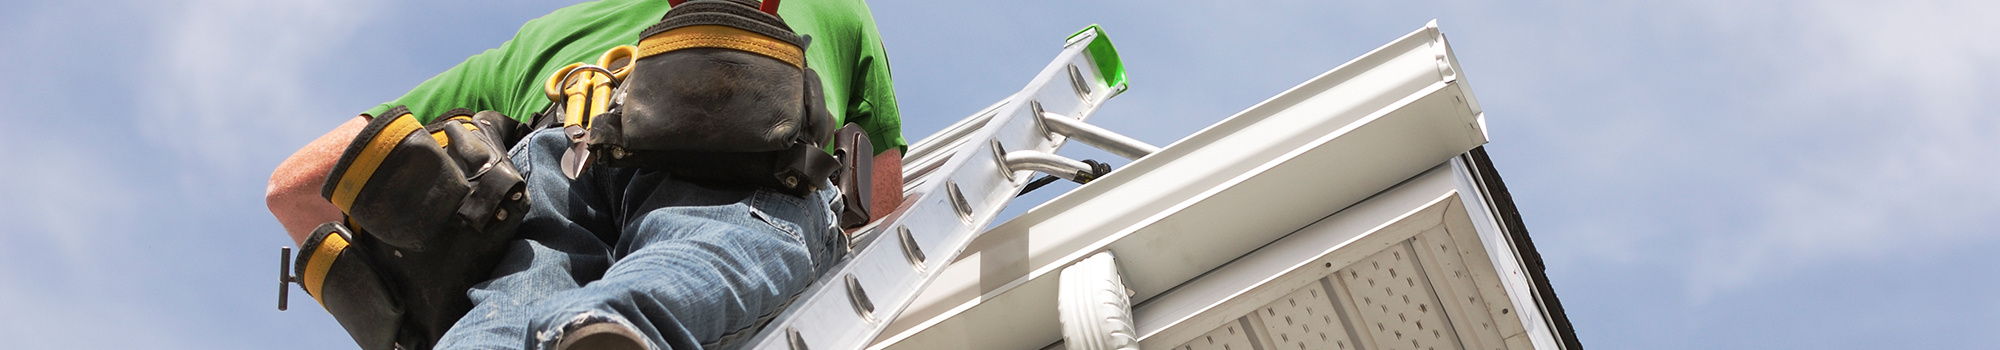 Gutter installation & replacecement in the Greater Milwaukee Area